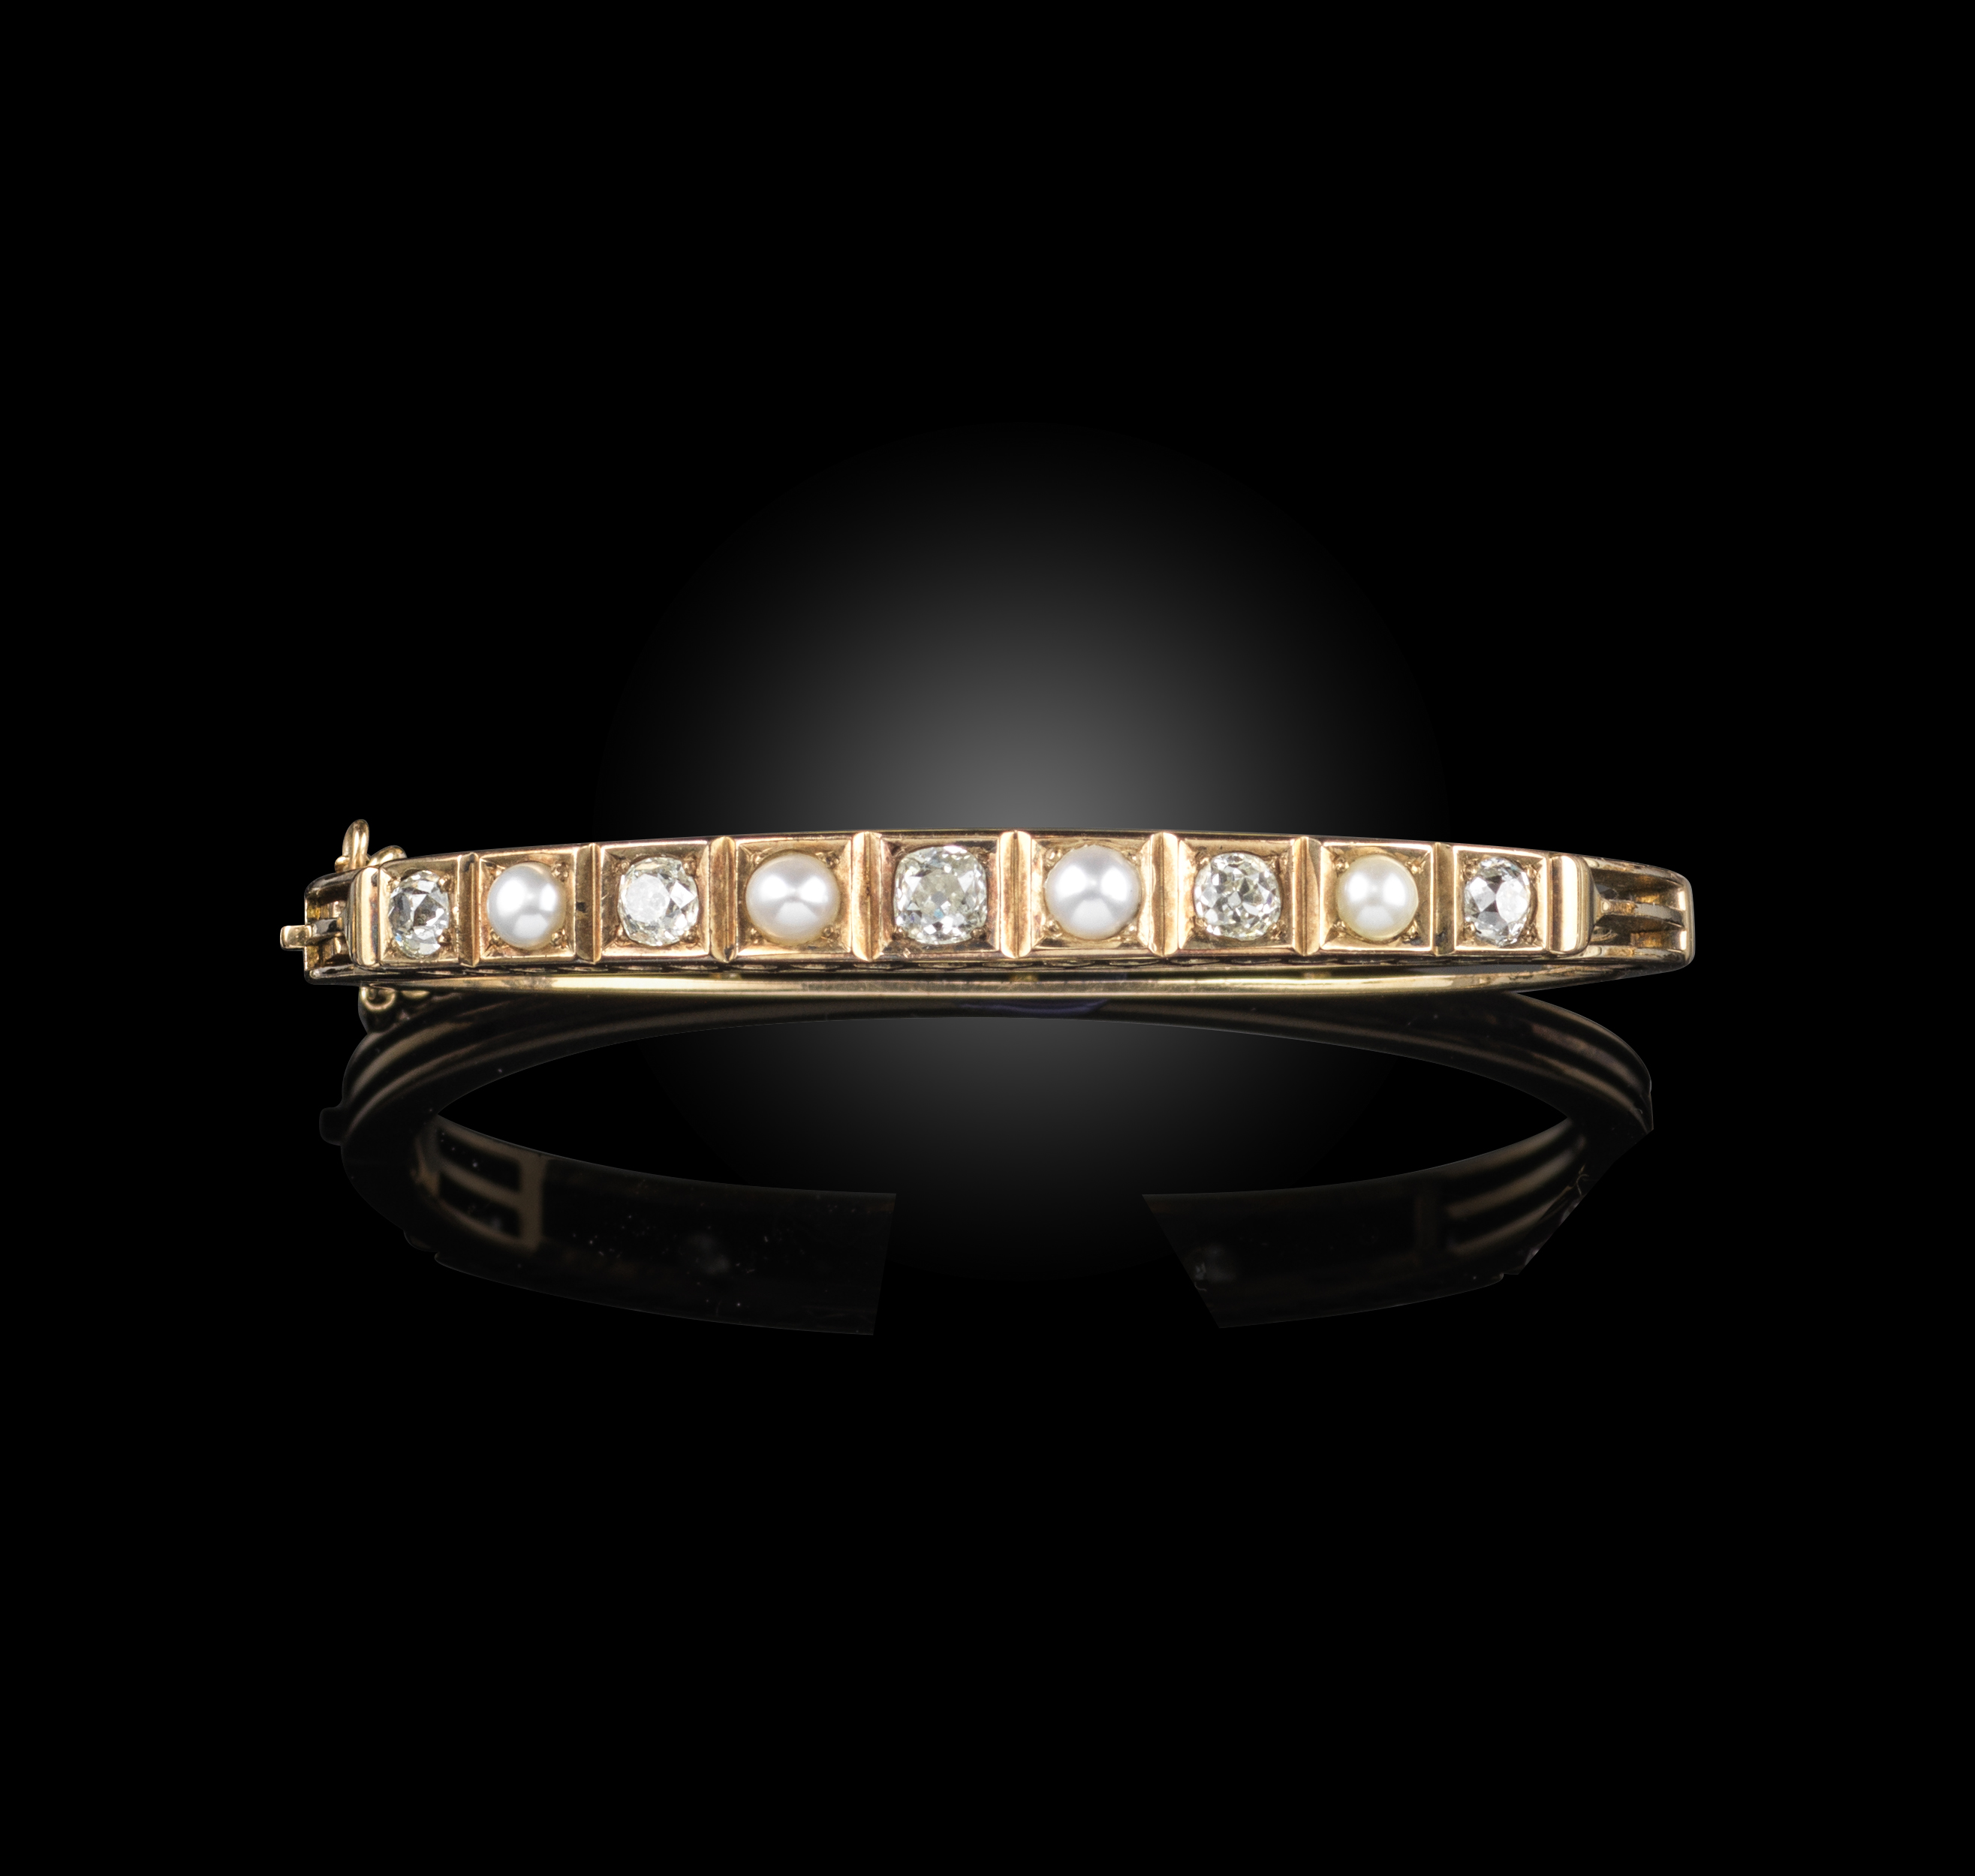 A late 19th century pearl and diamond bangle, alternately-set with cushion-shaped diamonds and